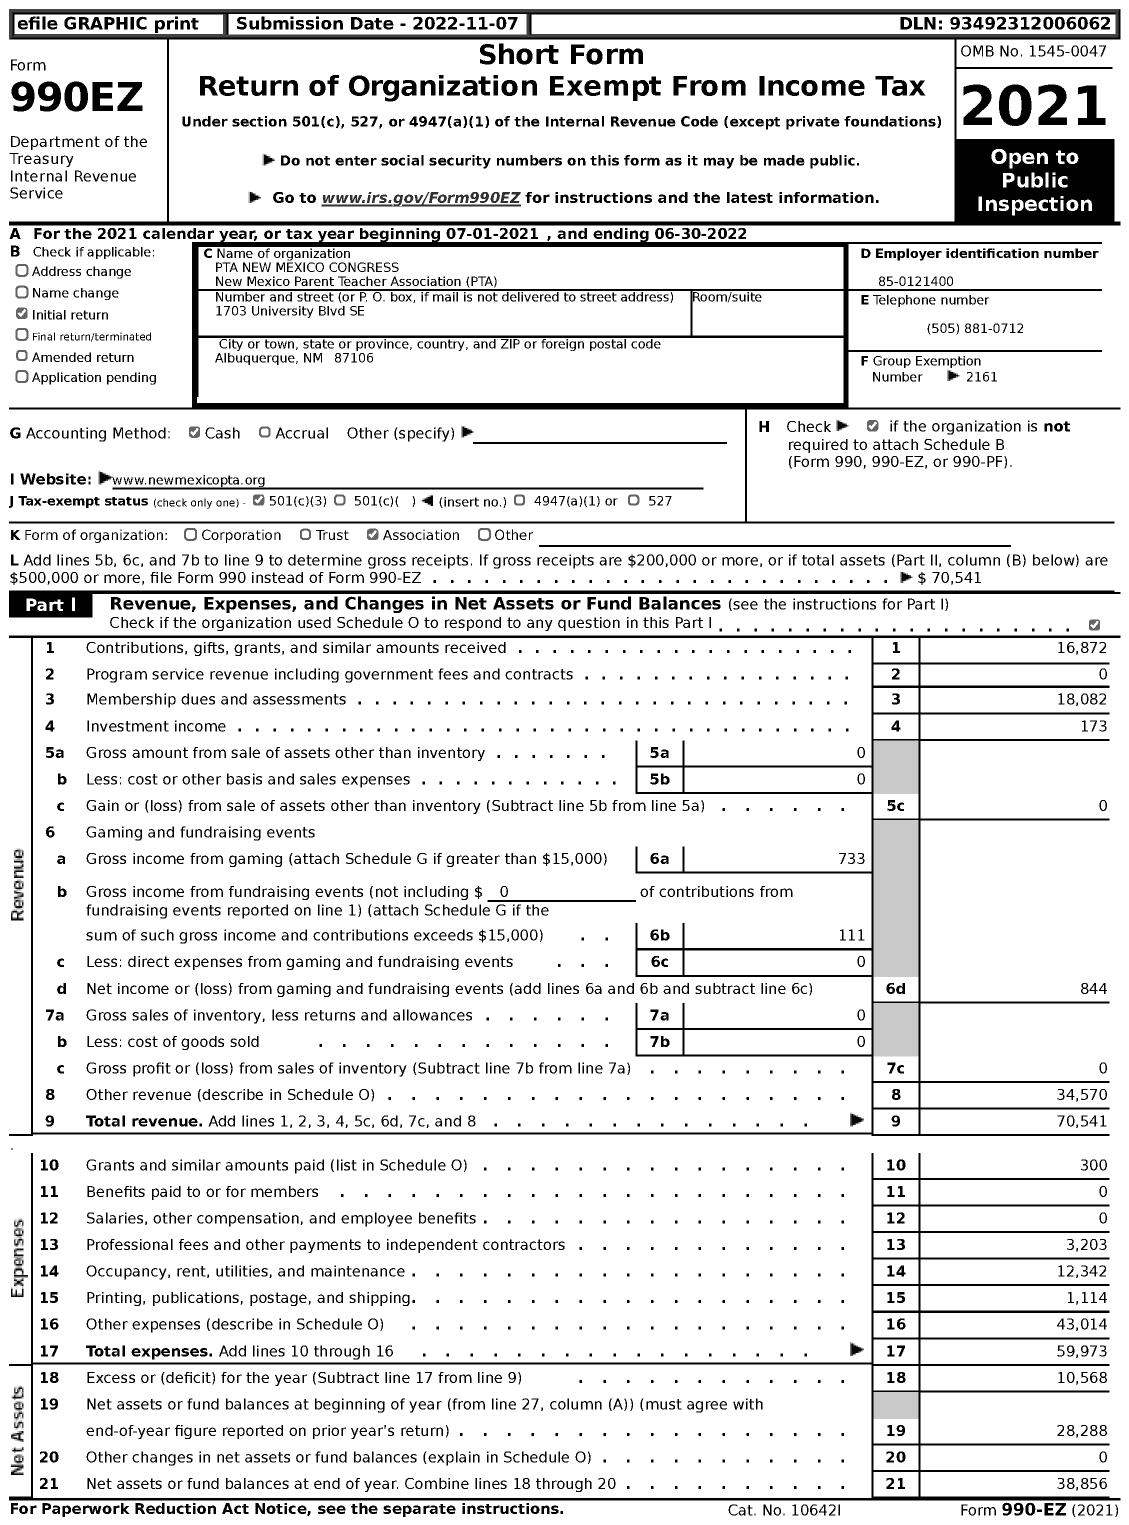 Image of first page of 2021 Form 990EZ for PTA New Mexico CONGRESS / NM PTA Parent Organization